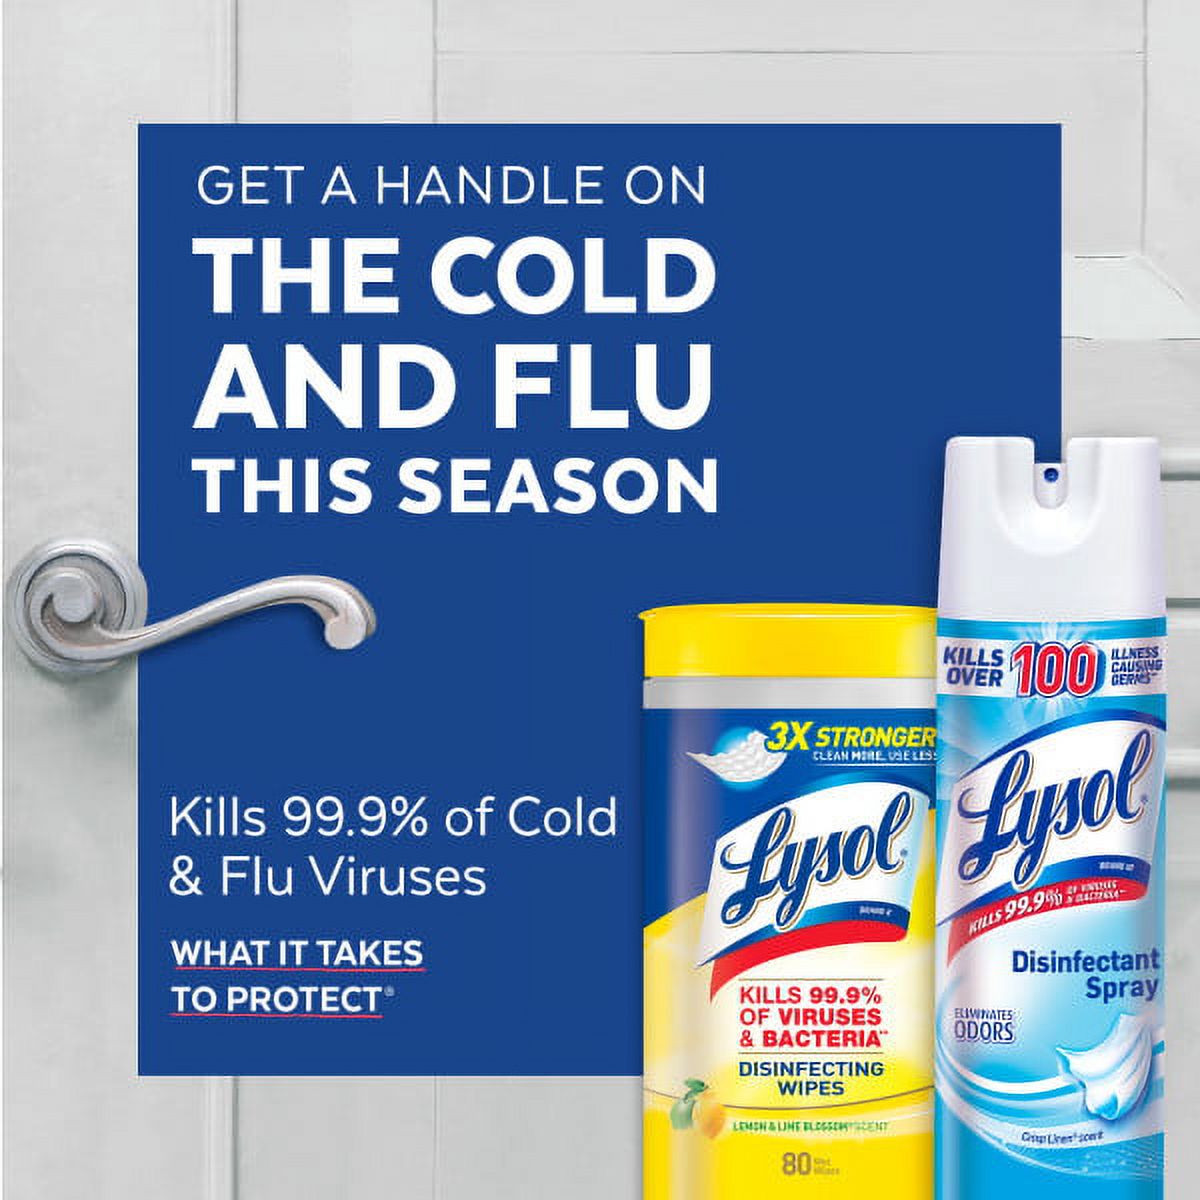 Lysol Disinfecting Wipes, Lemon & Lime Blossom, 320ct (4x80ct), Tested & Proven to Kill COVID-19 Virus, Packaging May Vary - image 2 of 9